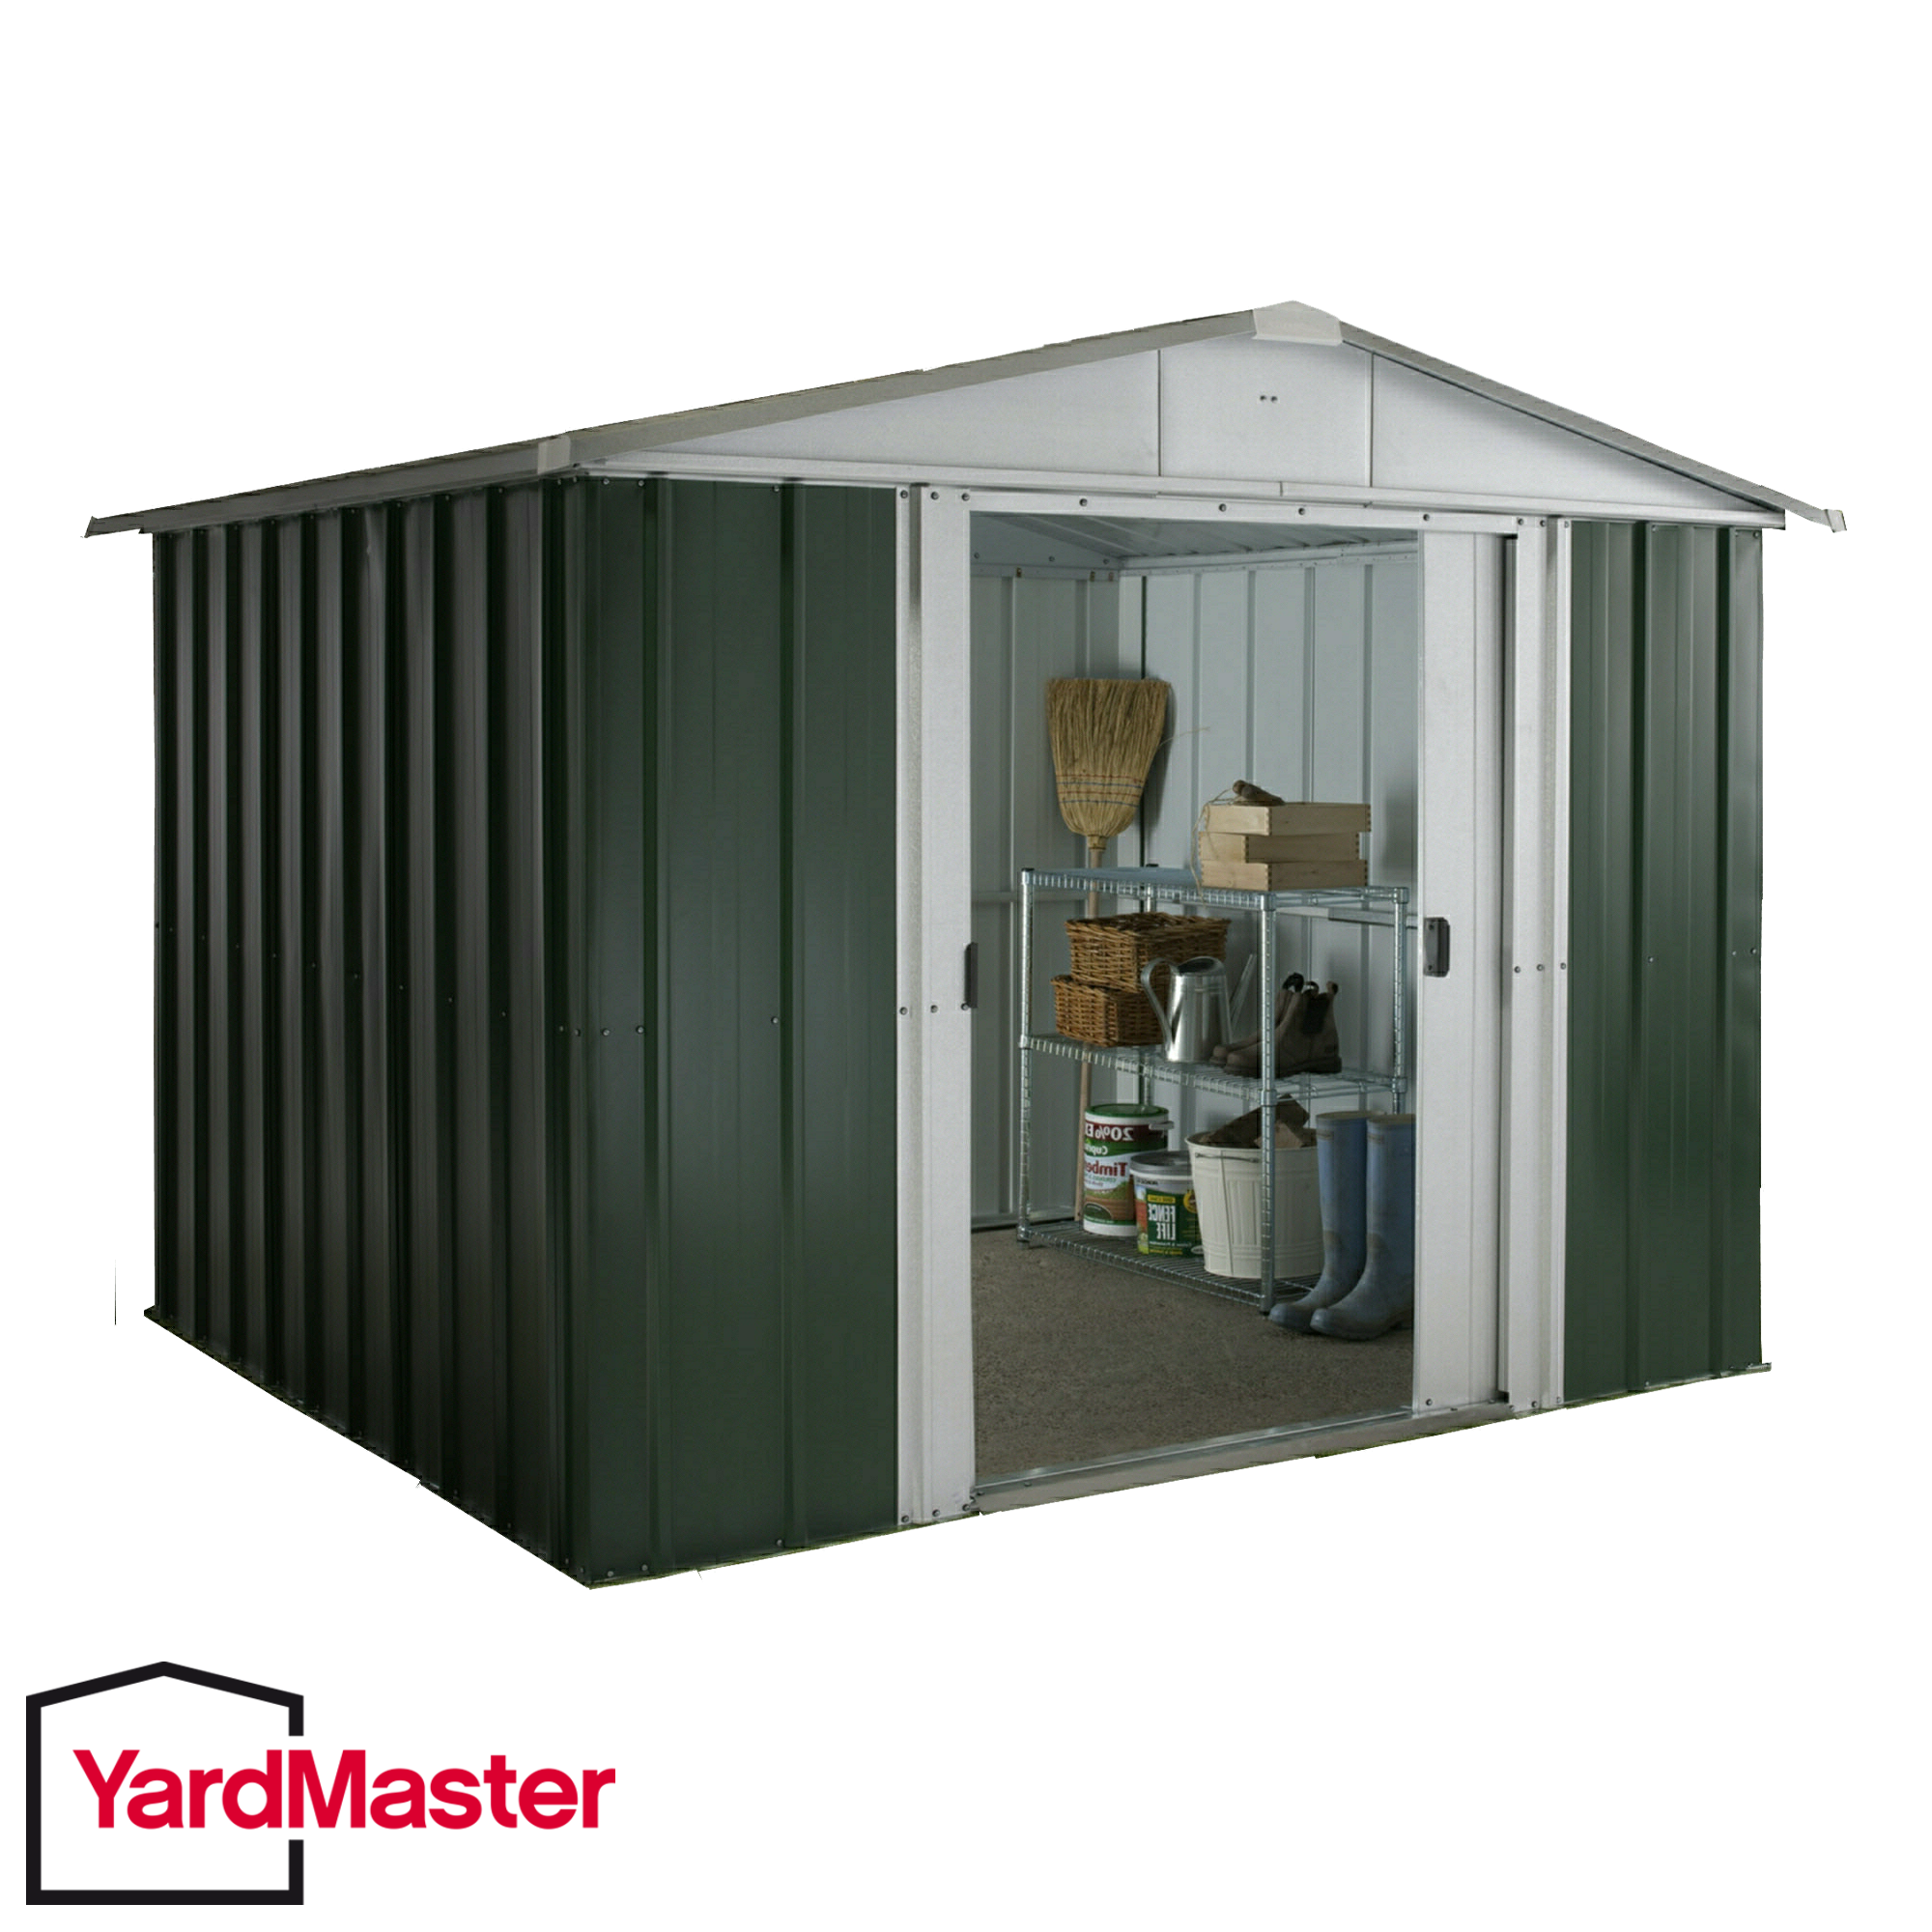 Featured image for “YardMaster 10x10 Emerald Deluxe Apex (GEYZ) Metal Shed”